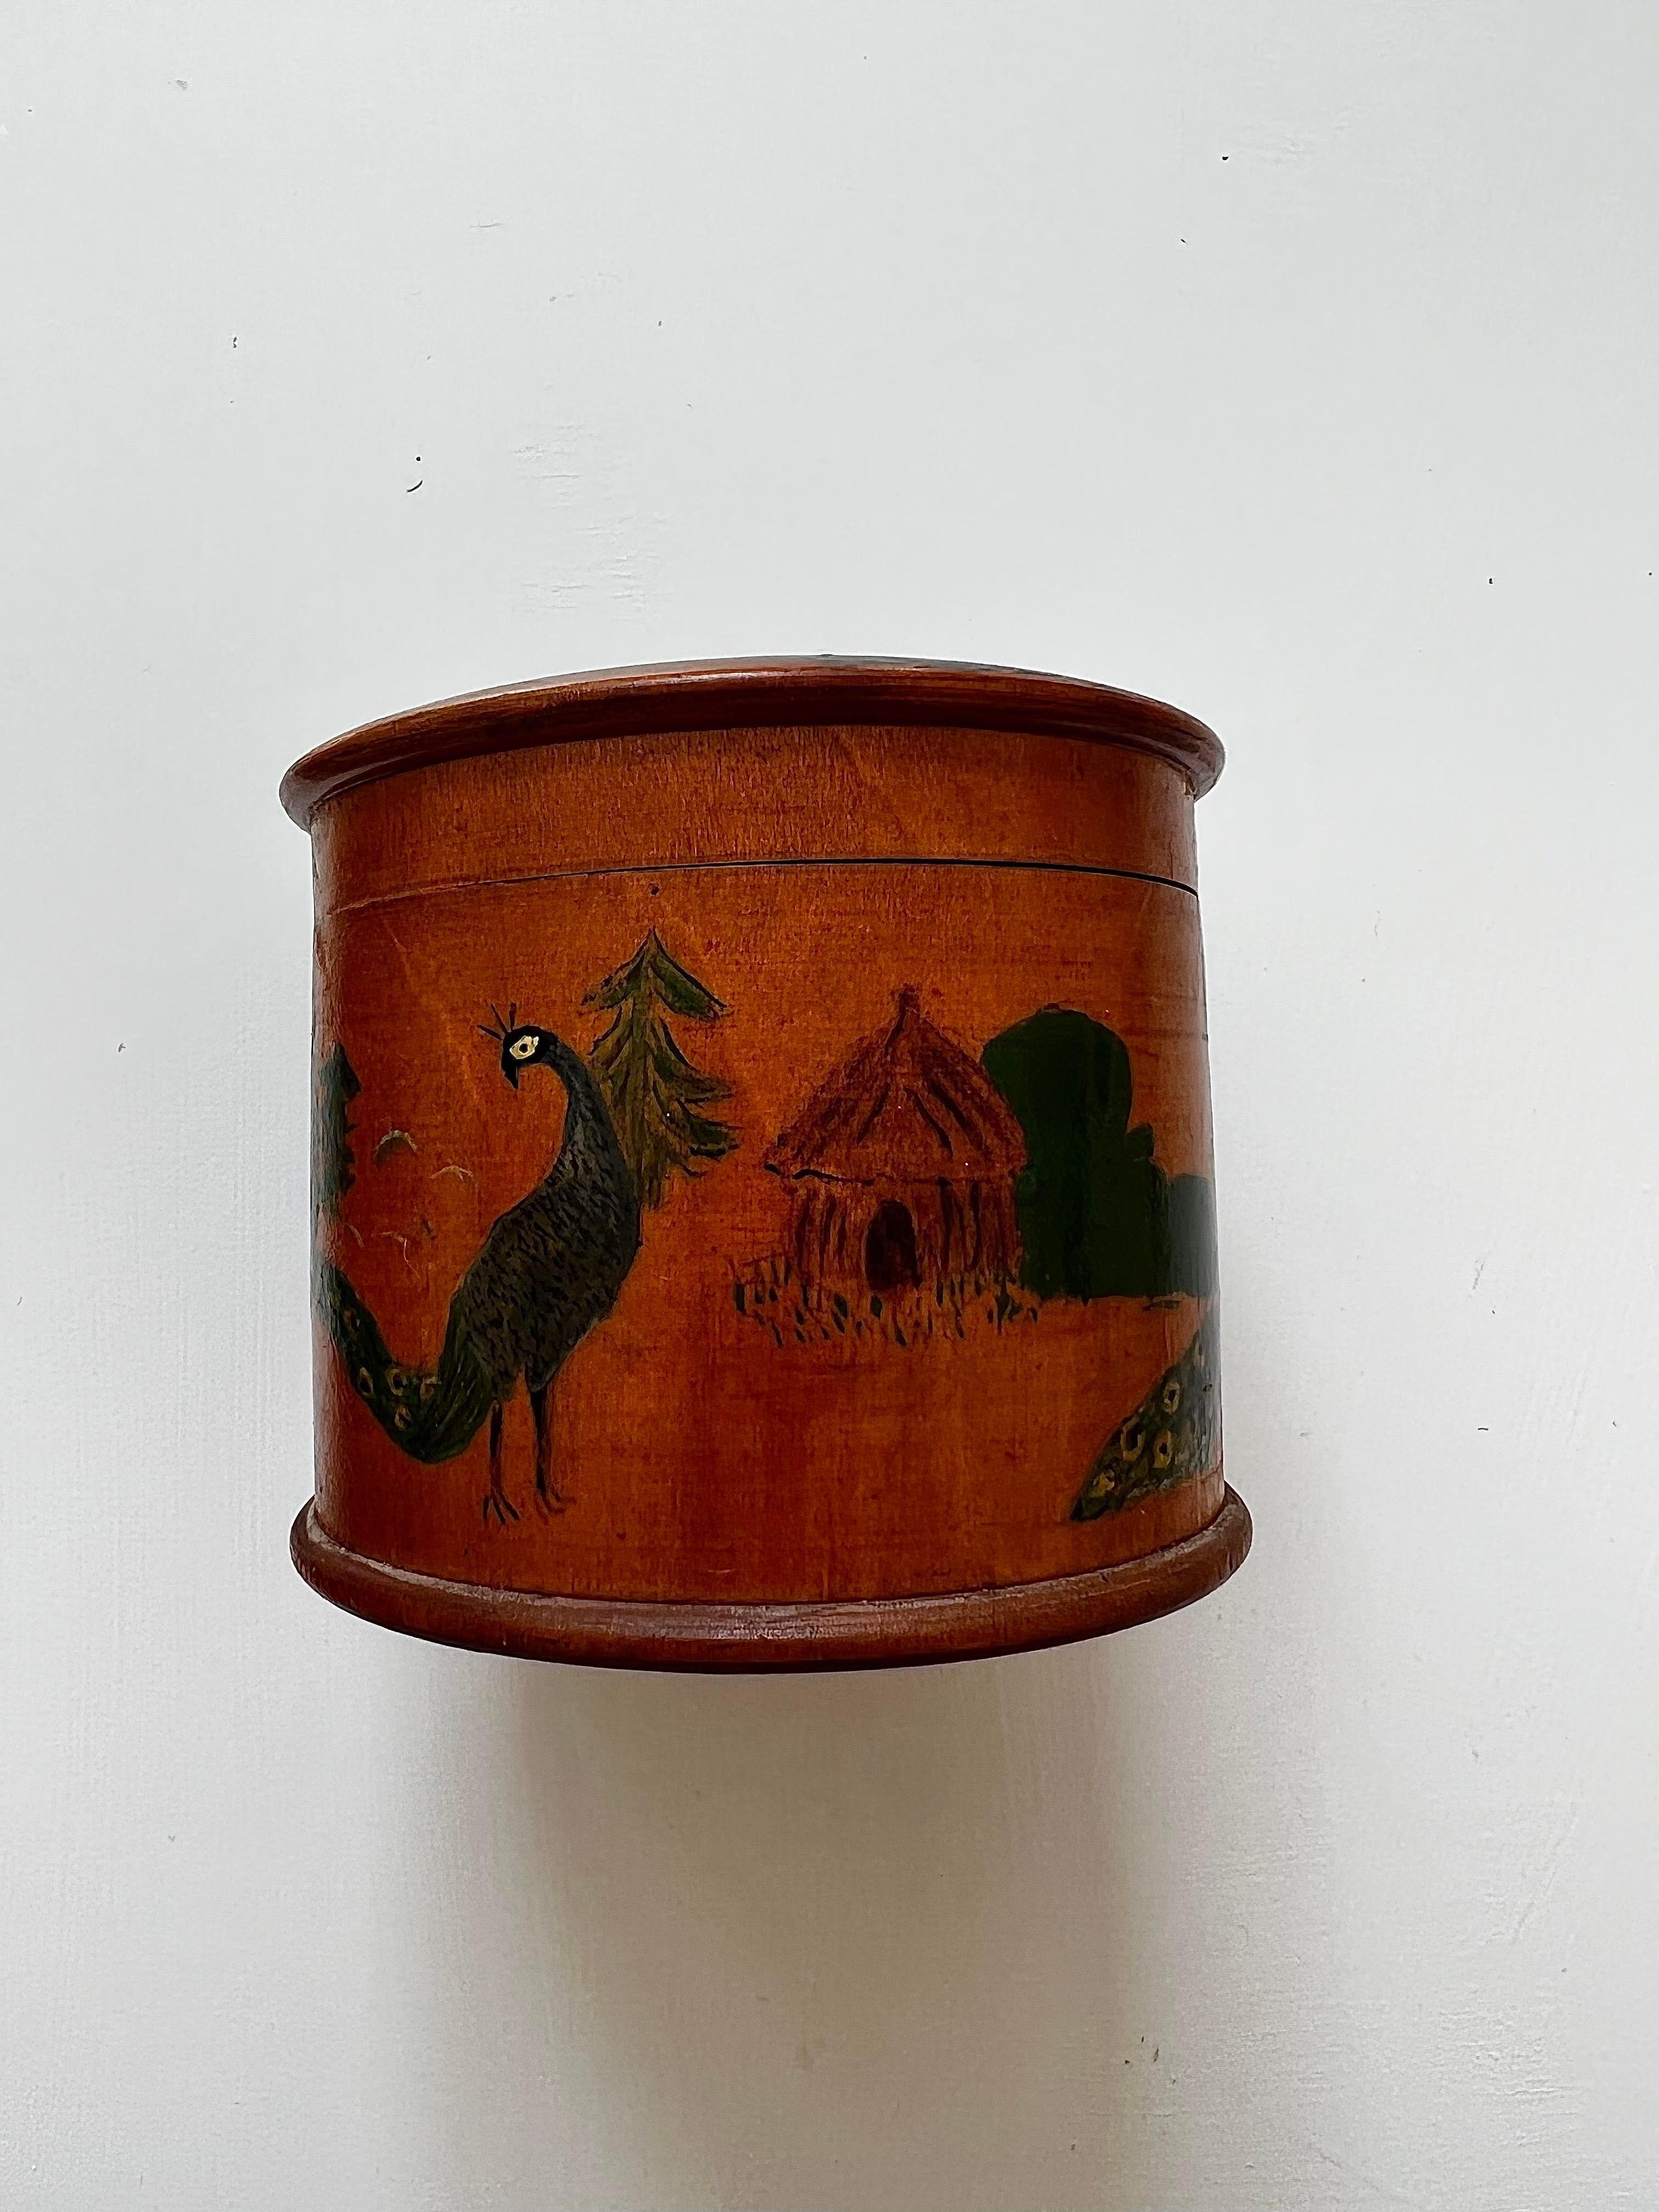 This Victorian wooden string box is very intricately painted by hand. There are beautiful scenes featuring peacocks around the box and a peacock with outstretched feathers on the lid. At the bottom of the box is a stamp reading 